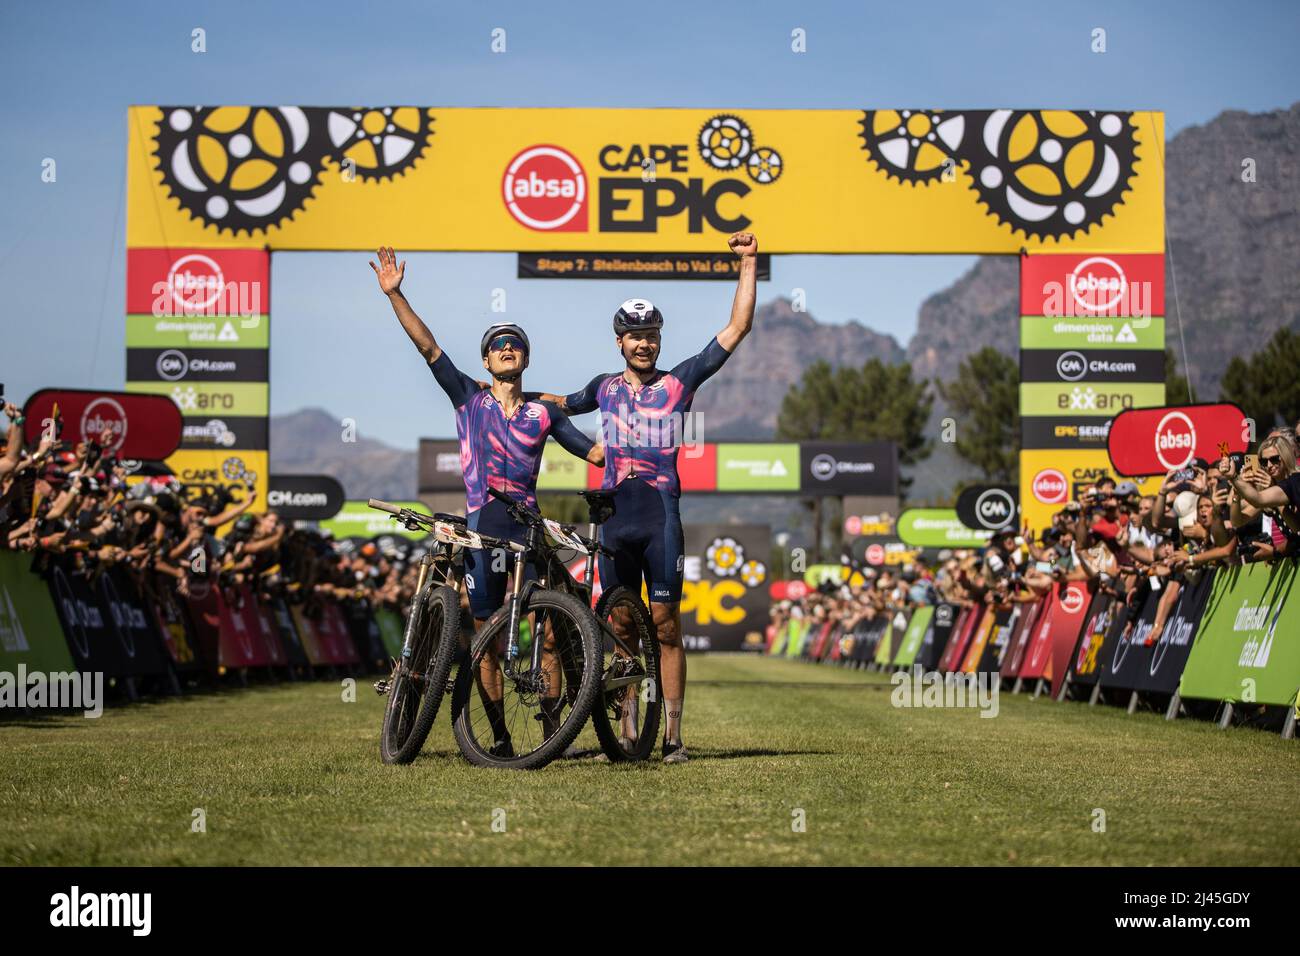 US/ARG bikers Haley Batten and Sofia Gomez Villafane celebrates victory in women doubles race of the Cape Epic in South Africa, March 27, 2022. (CTK P Stock Photo